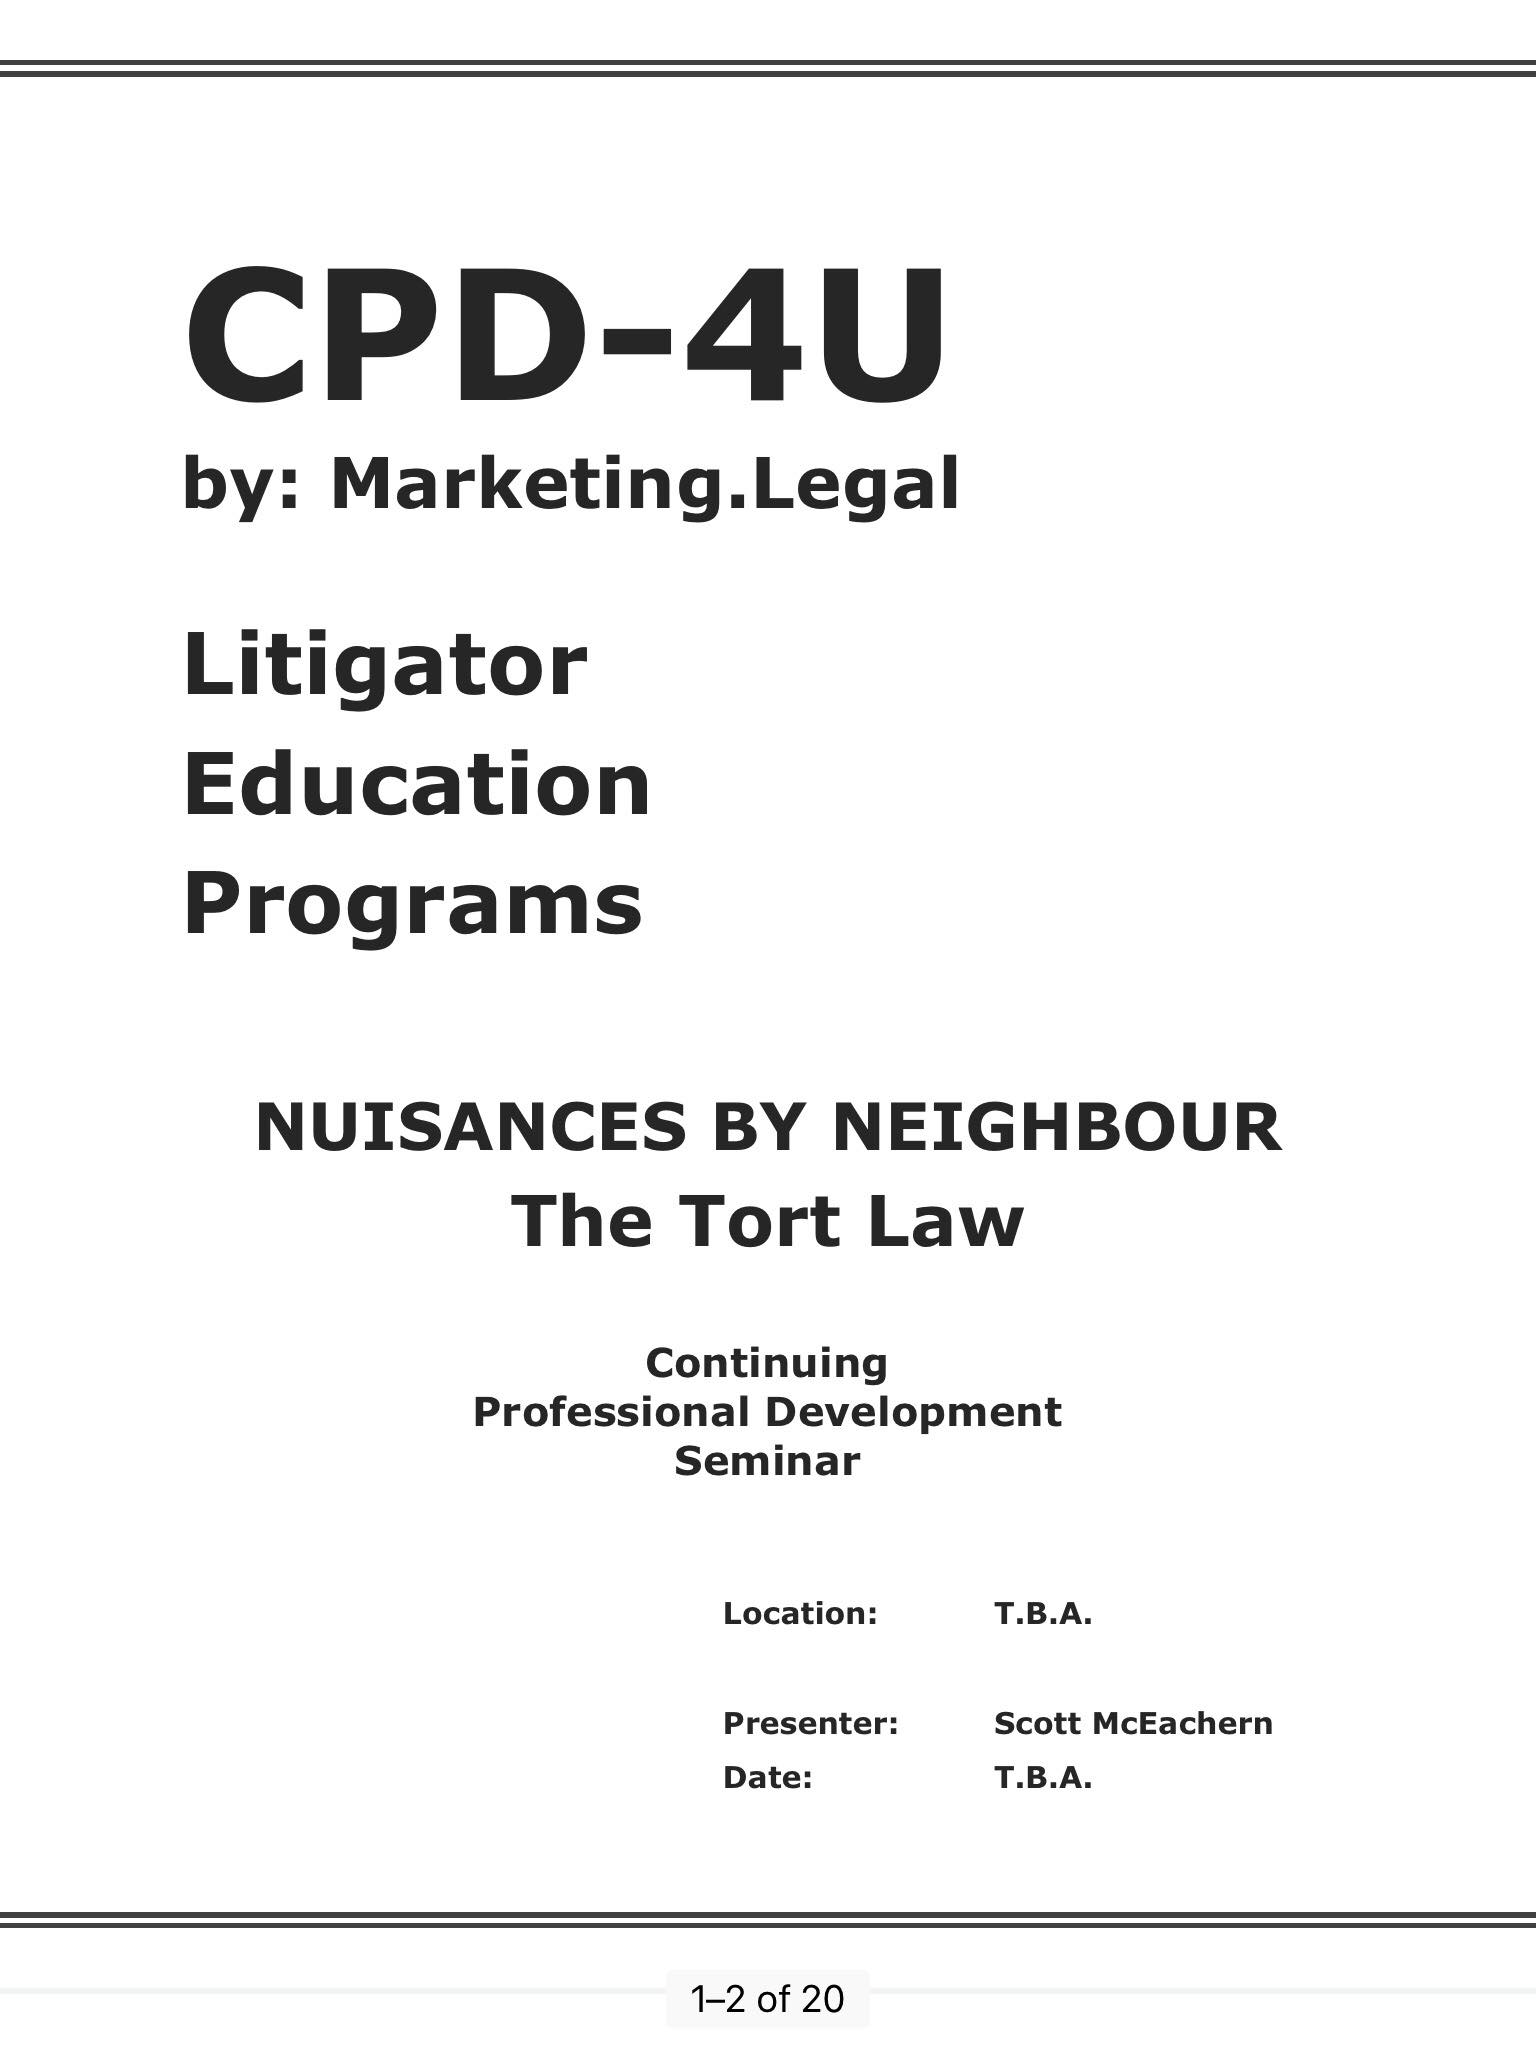 Nuisances by Neighbour Continuing Professional Development (CPD)